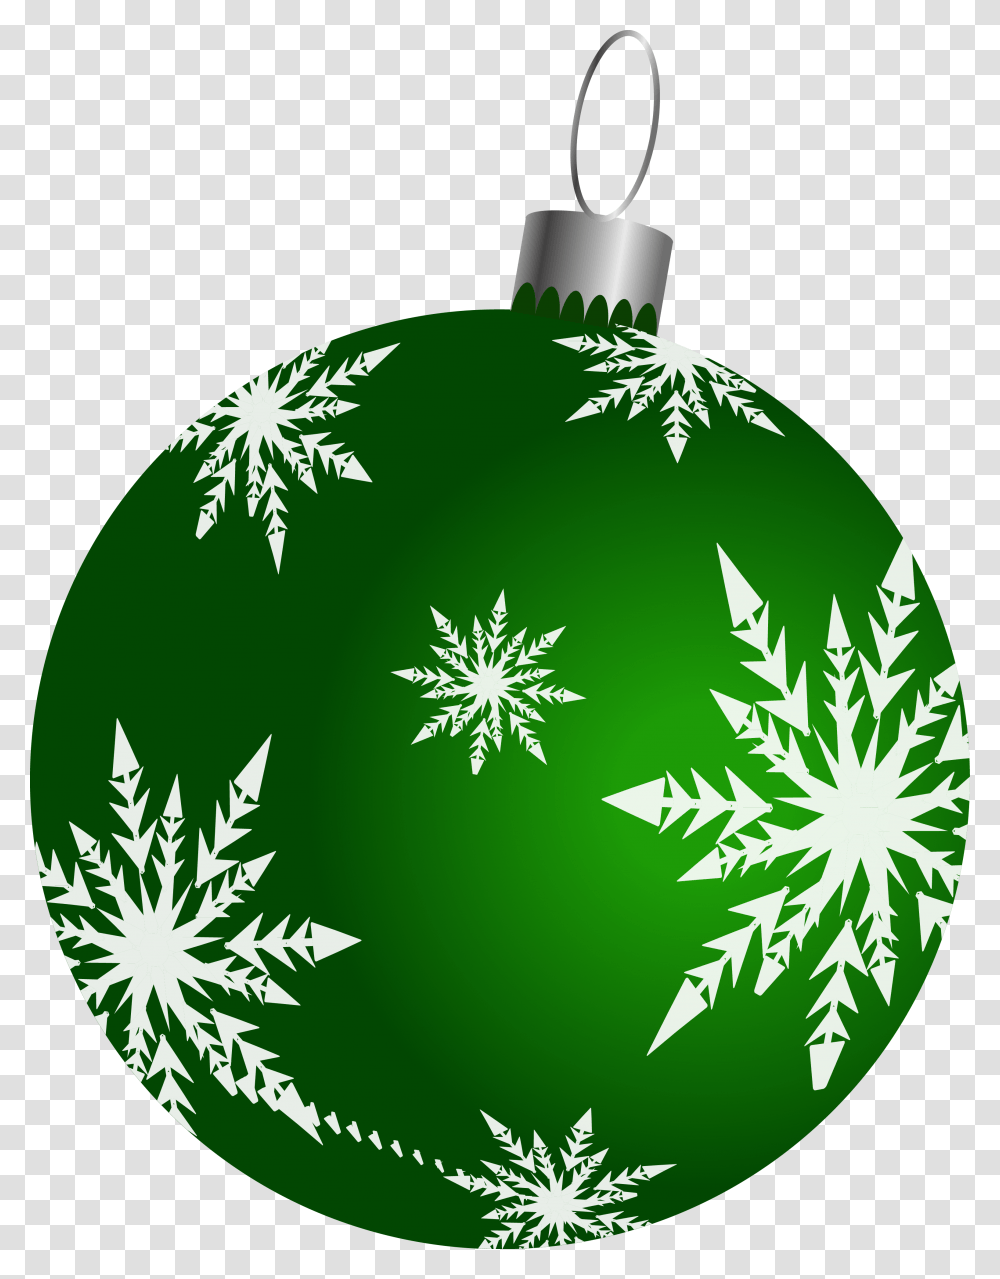 December Balls Tree Ornament Artificial Amazing Year Christmas Ornament, Snowflake, Pattern Transparent Png